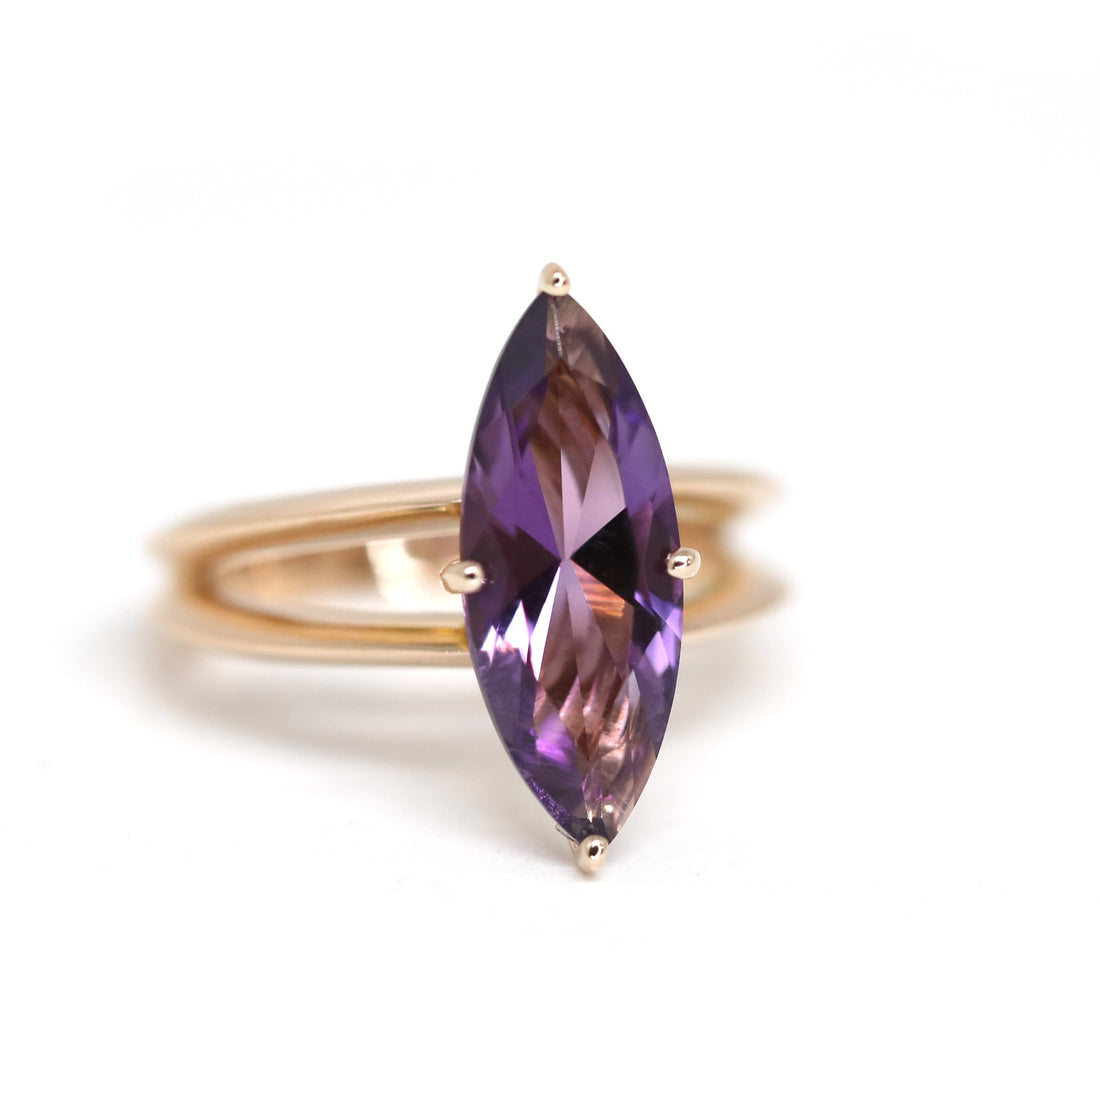 Marquise Shape Amethyst Rose Gold Bena Jewelry Ring Fine Jewelry Color Gemstone Simple Shape Minimalist Fine Jewelry Montreal Made in Canada Purple Natural Color Gemstone Jewelry